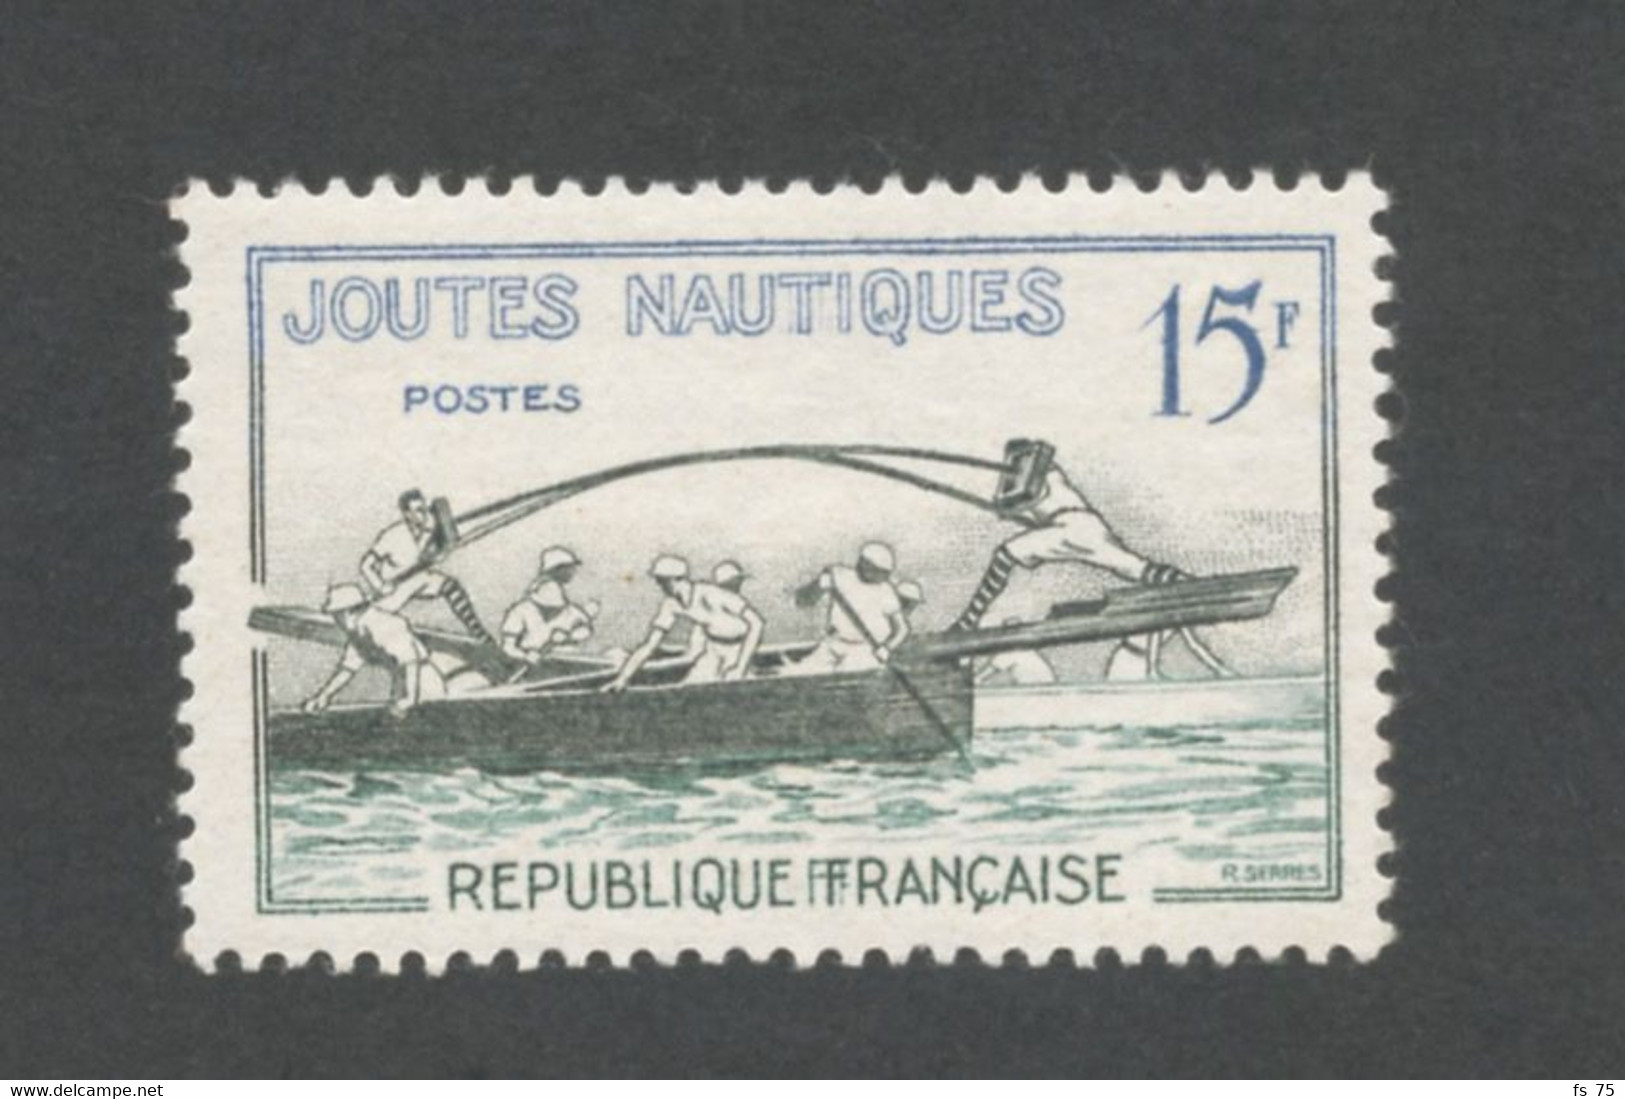 FRANCE - N°1162  15F JOUTES NAUTIQUES - DOUBLE F A FRANCAISE - NEUF SANS CHARNIERE - Unused Stamps